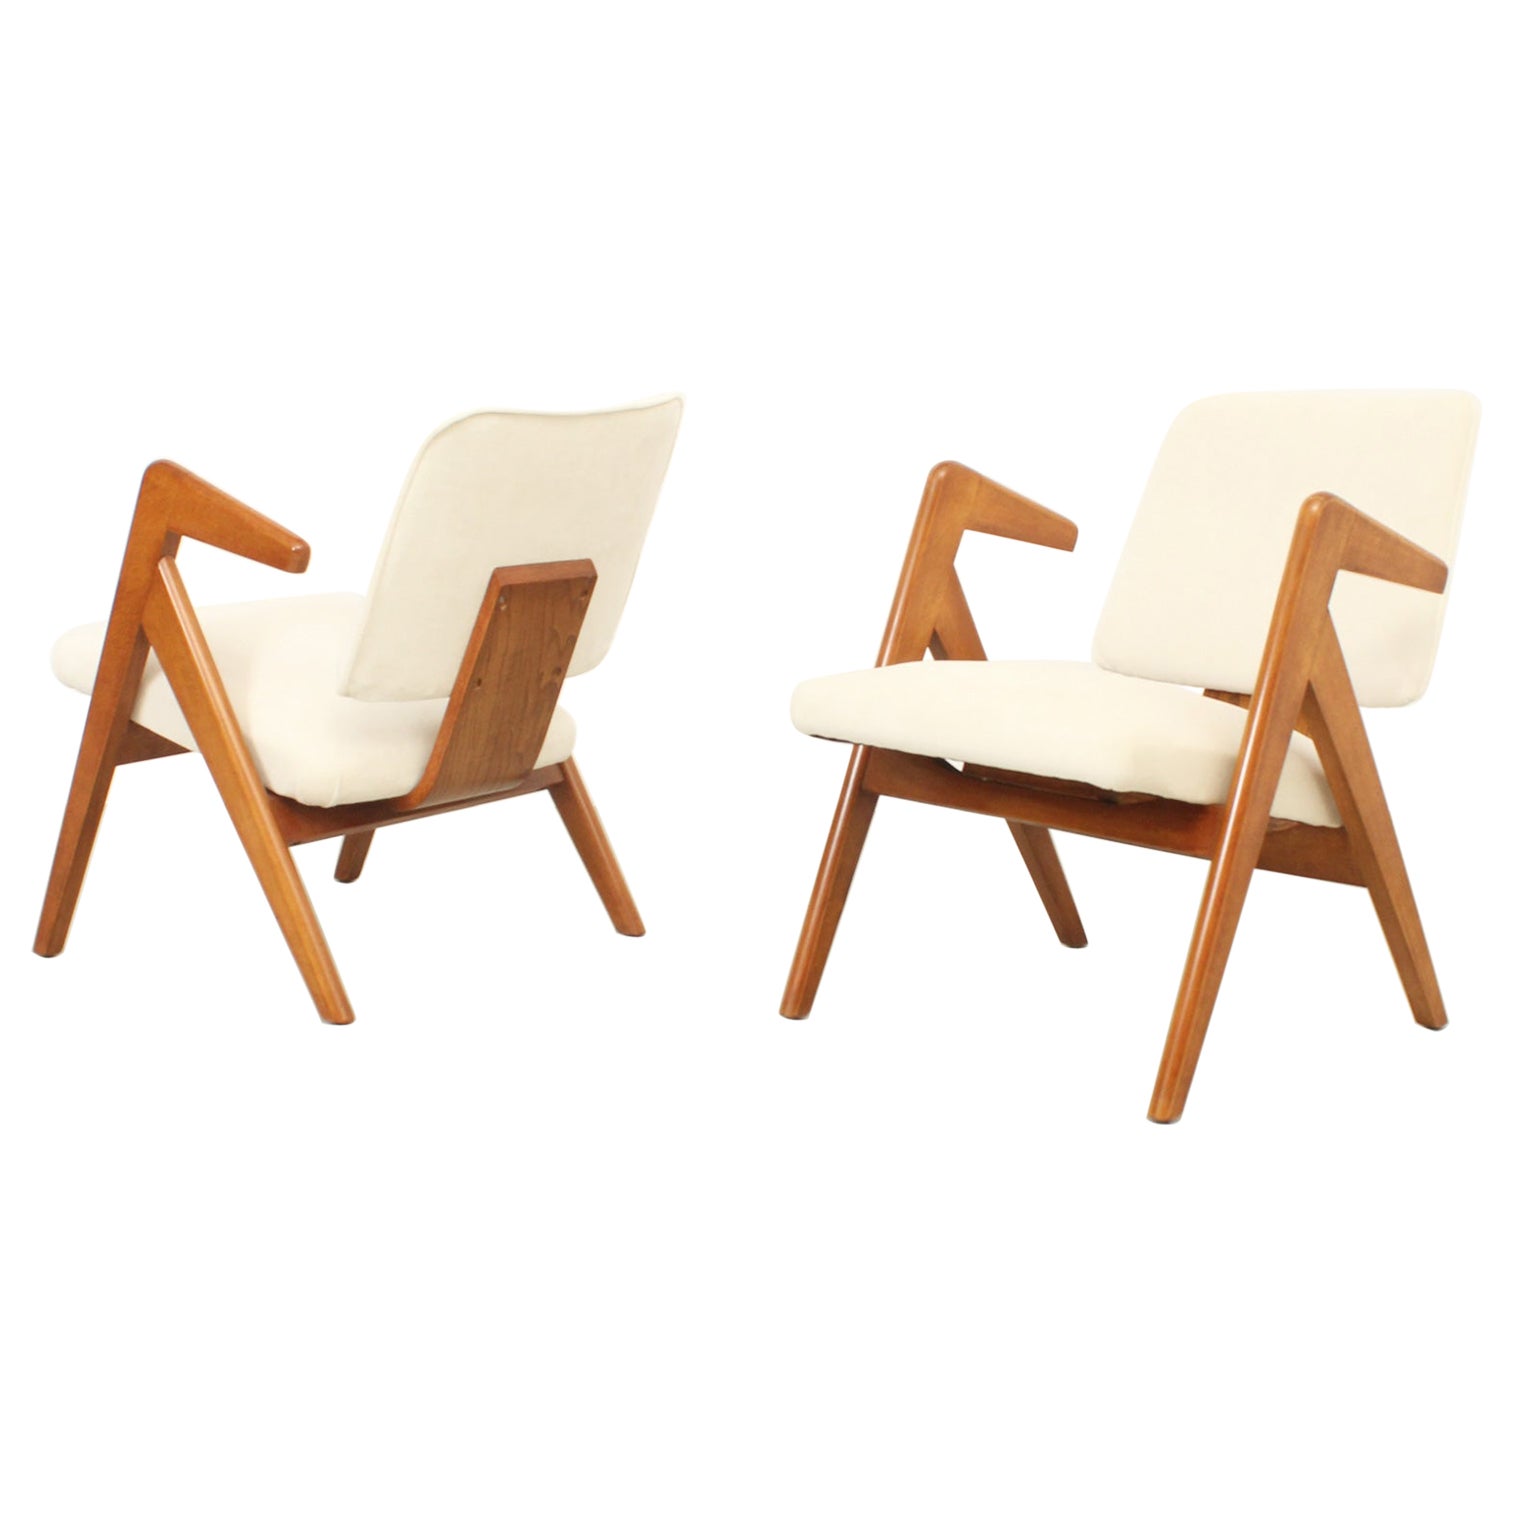 Pair of Hillestak Armchairs by Robin Day, UK, 1950s For Sale